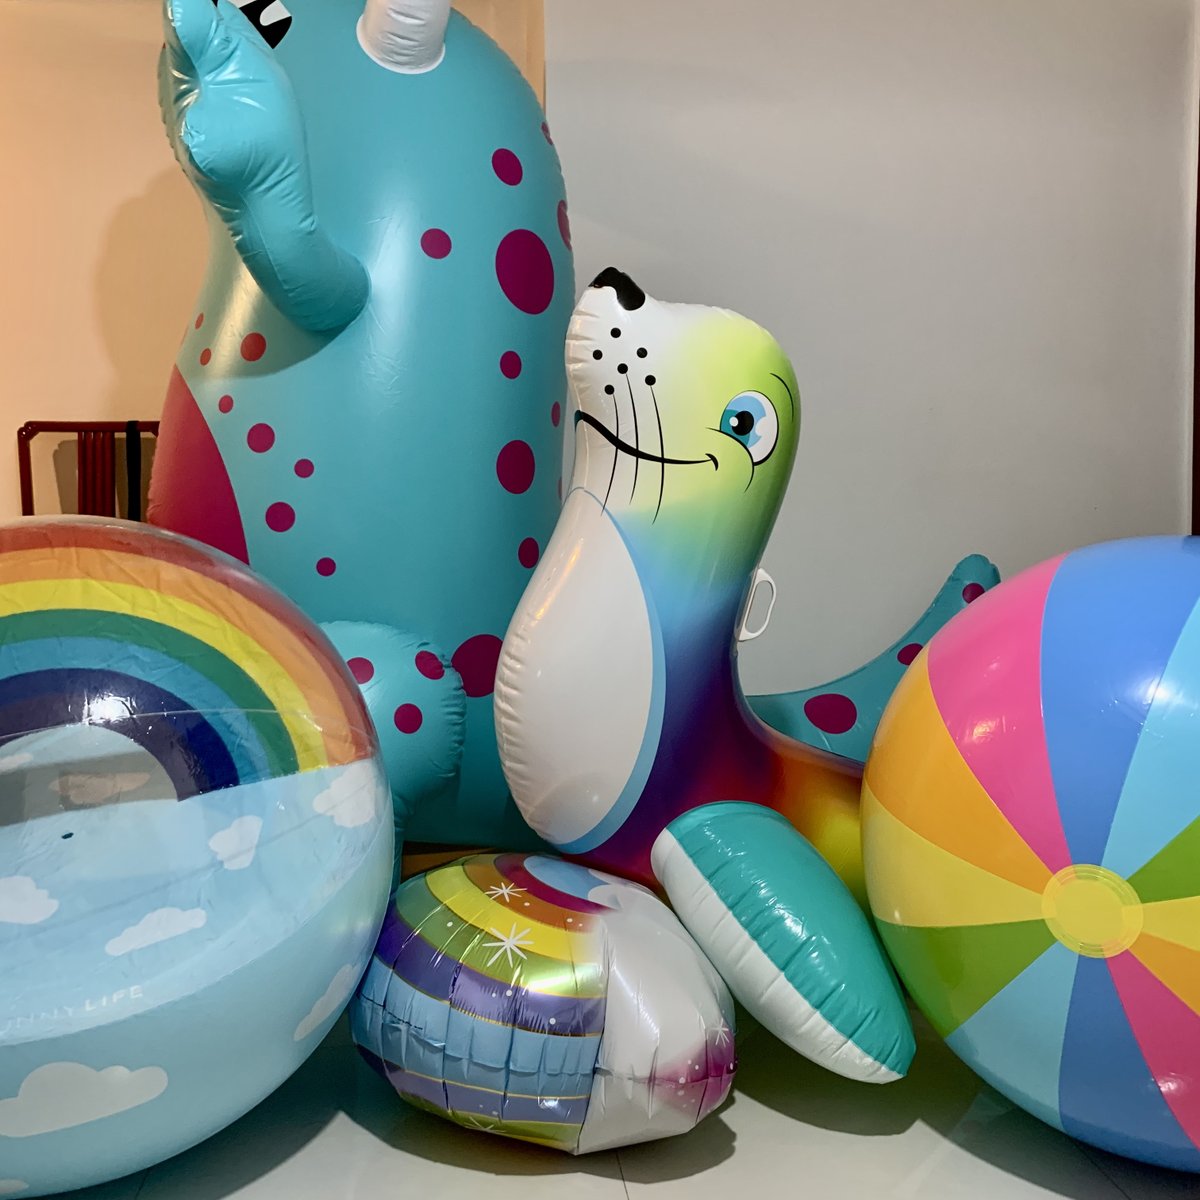 For #earthday and #squeakysaturday a #rainbowday 🌈🌎🥰
.
#seal #inflatableseal #bestway #rainbowseal #inflatablemonster #balloon #beachball #beach #ball #inflatable #inflatables #pooltoy #pooltoys #float #floats #floatie #floaties #floaty #floatys #poolfloat #poolfloats